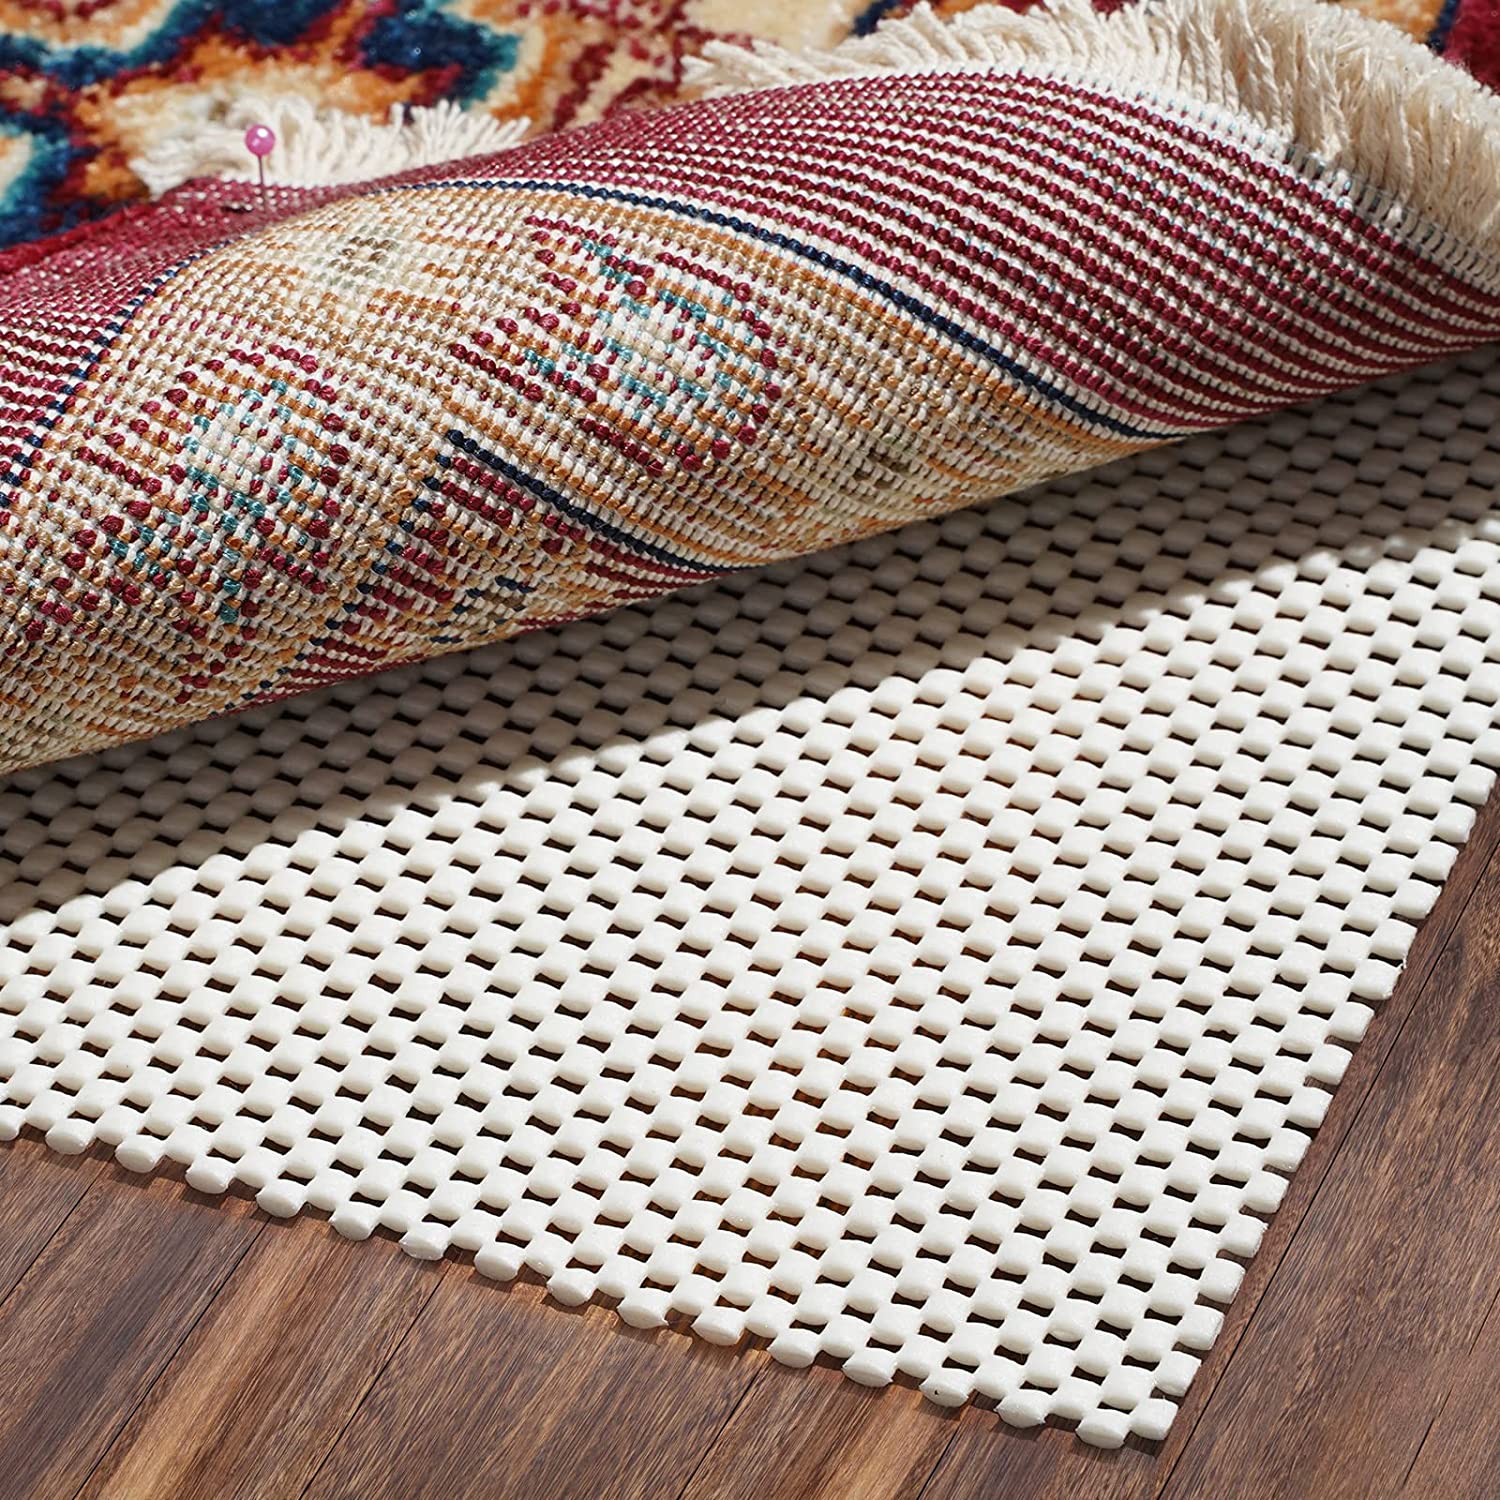 Non Slip Rug Pad Gripper 8 x 10 Feet Extra Thick Carpet Pads for Area Rugs  and Hardwood Floors, Keep Your Rugs Safe and in Place 2 x 3 Ft